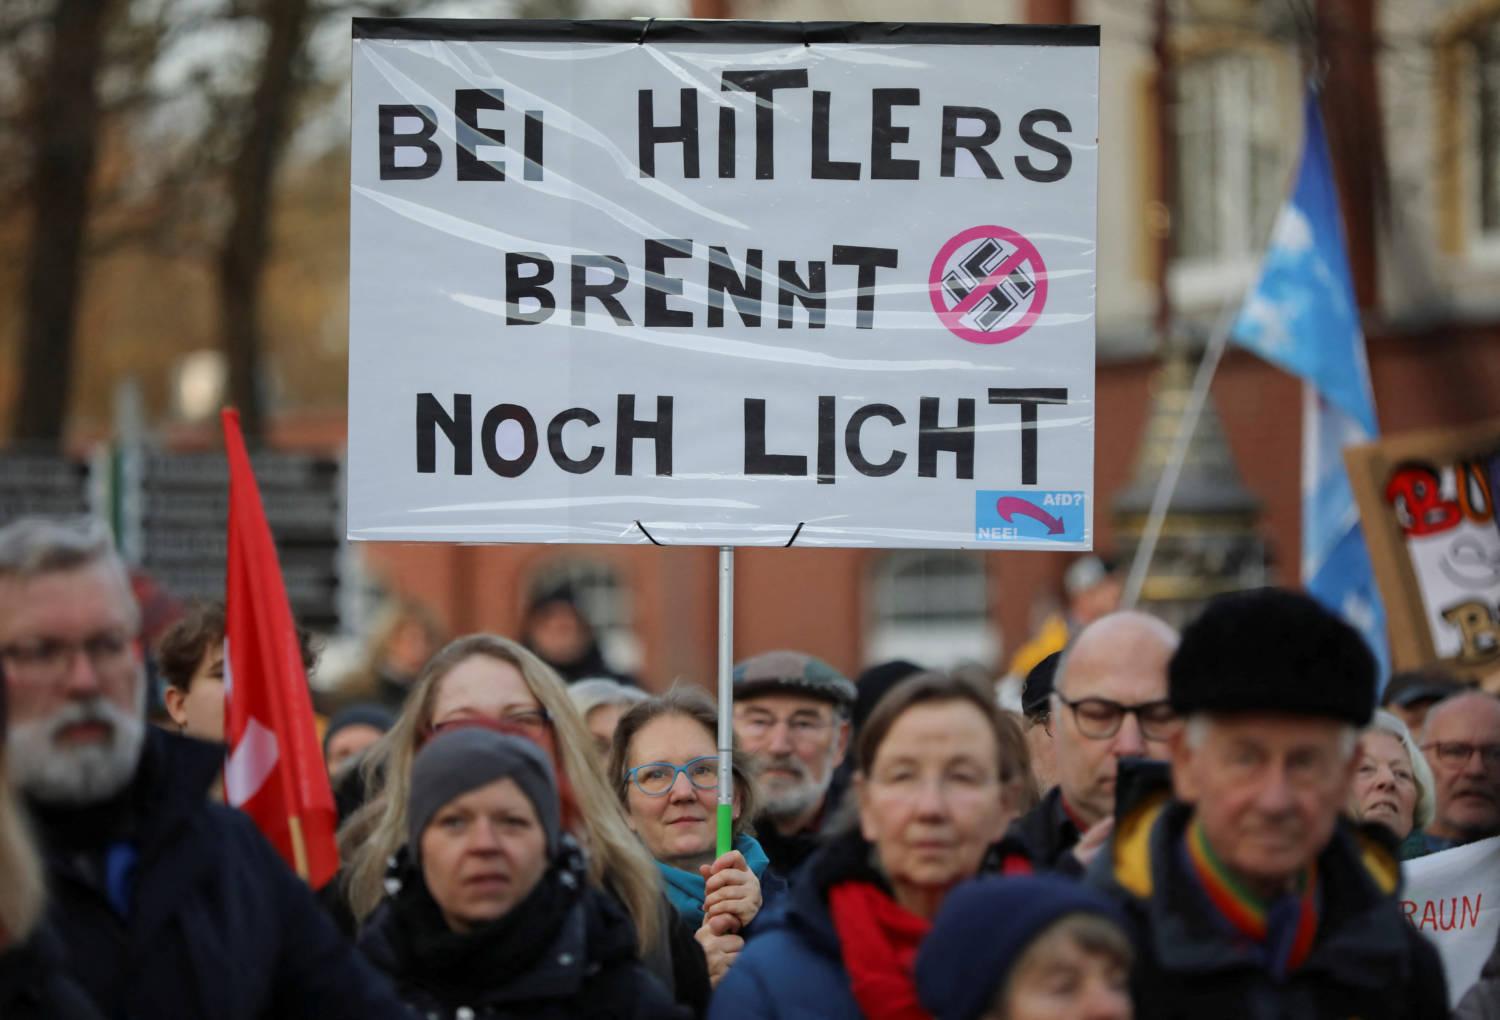 Demonstration Against Afd And Right Wing Extremism, In Eichwalde Near Berlin